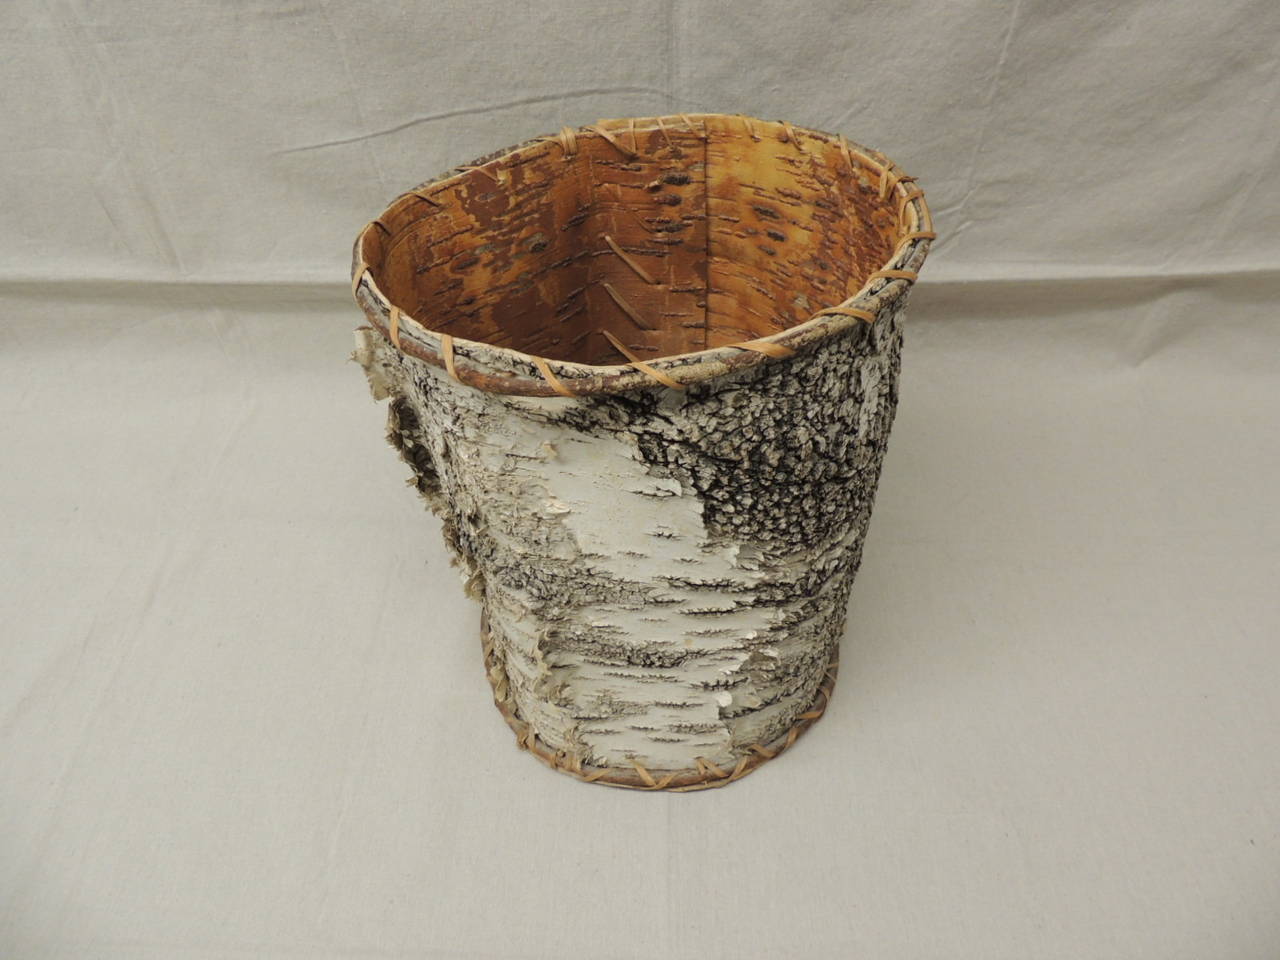 Tree bark waste basket, hand crafted of tree bark and weave with vines and thin rattan edges. The bottom of the basket is cover in bark.